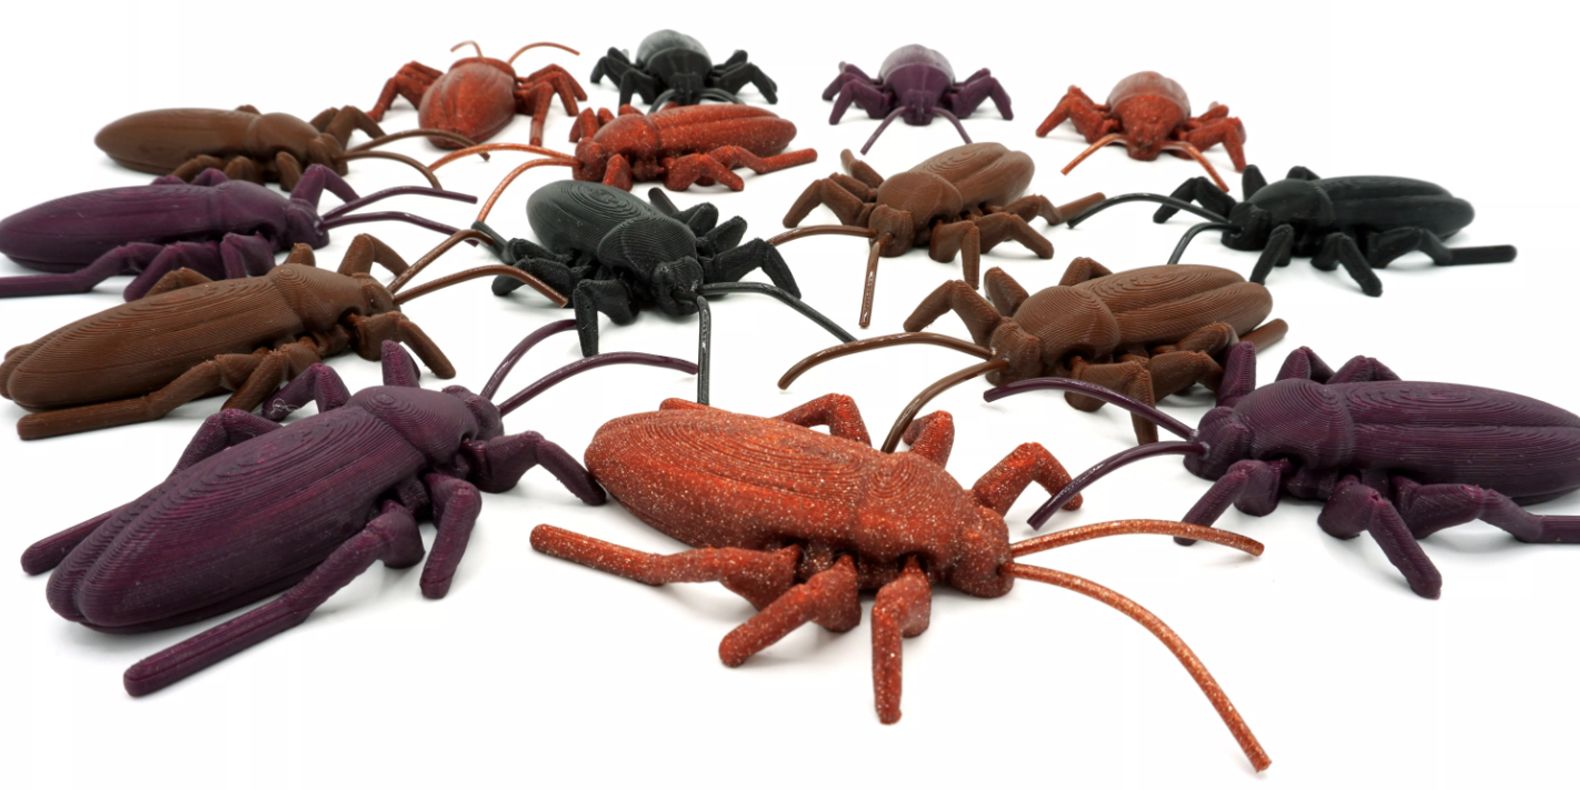 Here is a selection of the best 3D printable STL files for 3D printer of insects and bugs